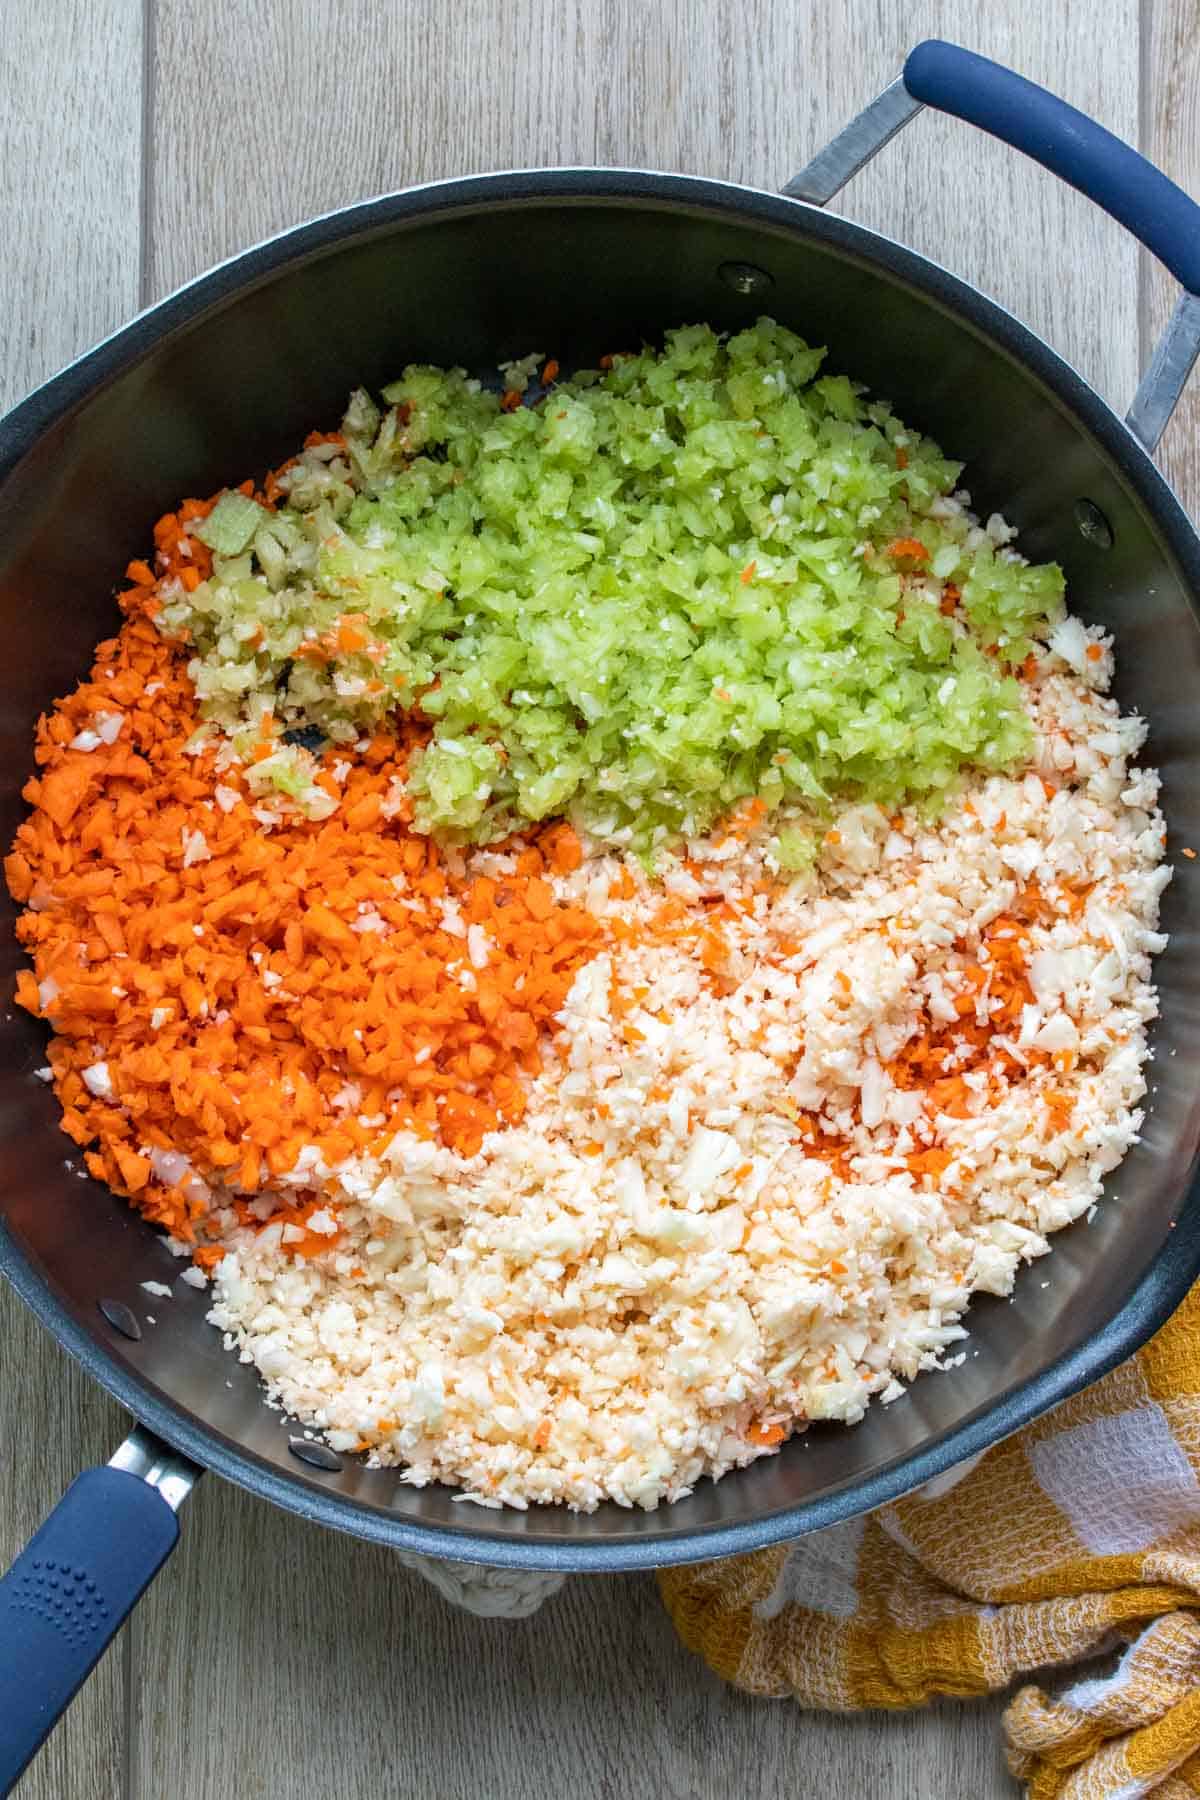 Finely chopped carrots, celery and cauliflower in a pan